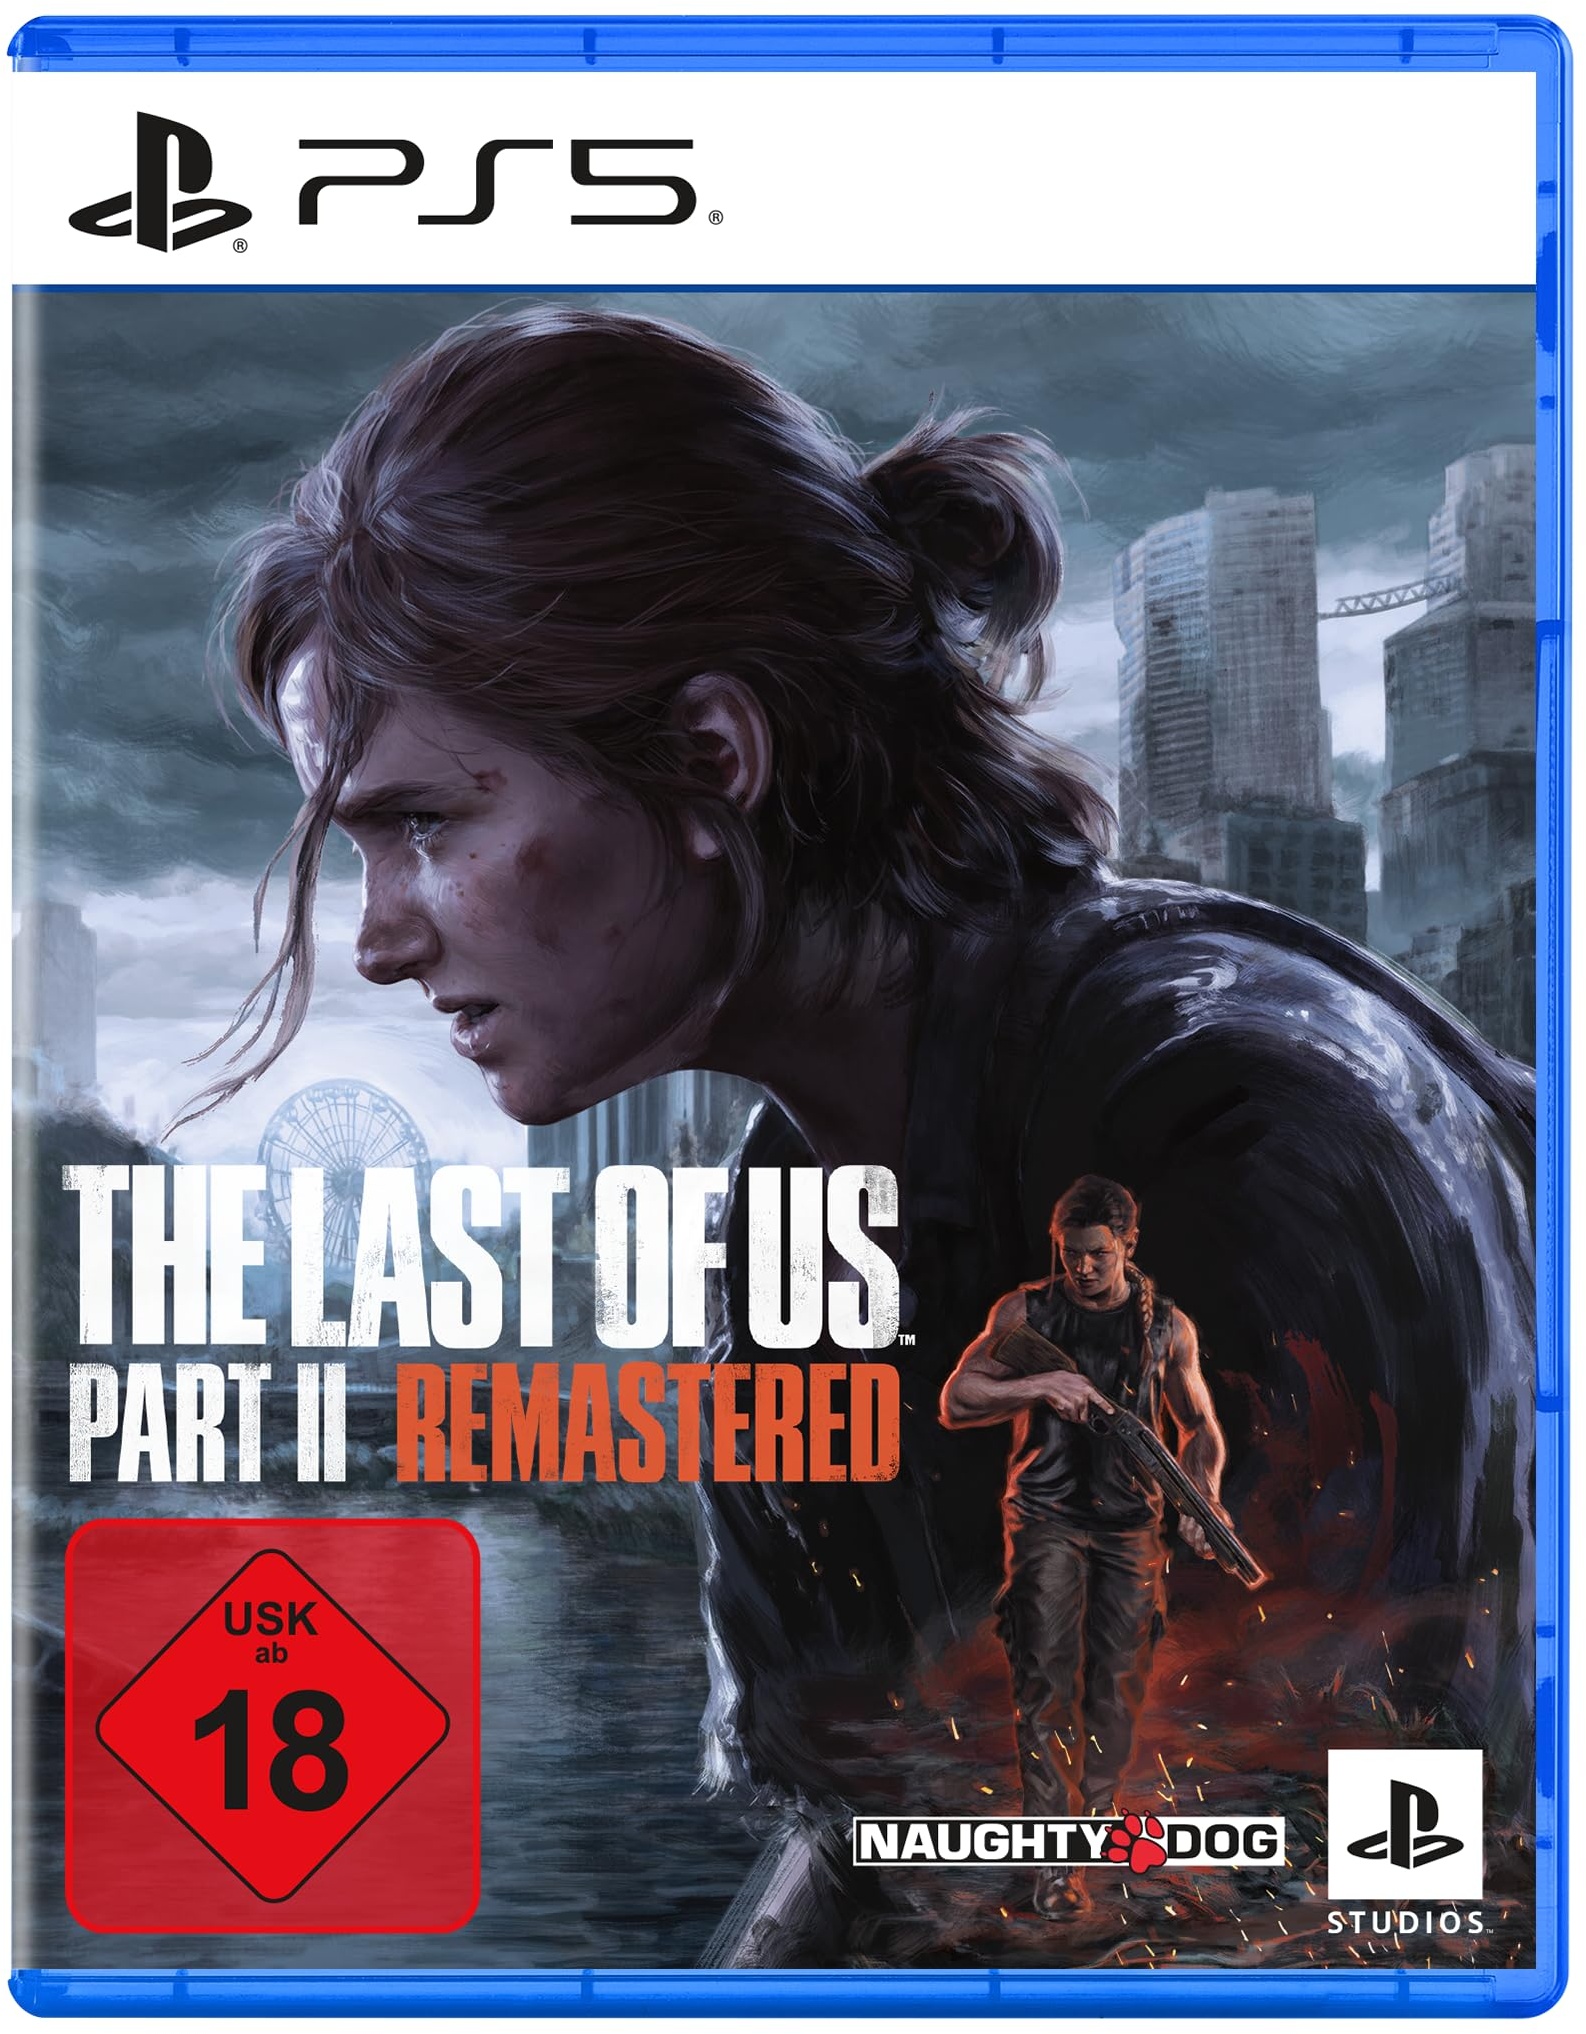 The Last of US Part II Remastered